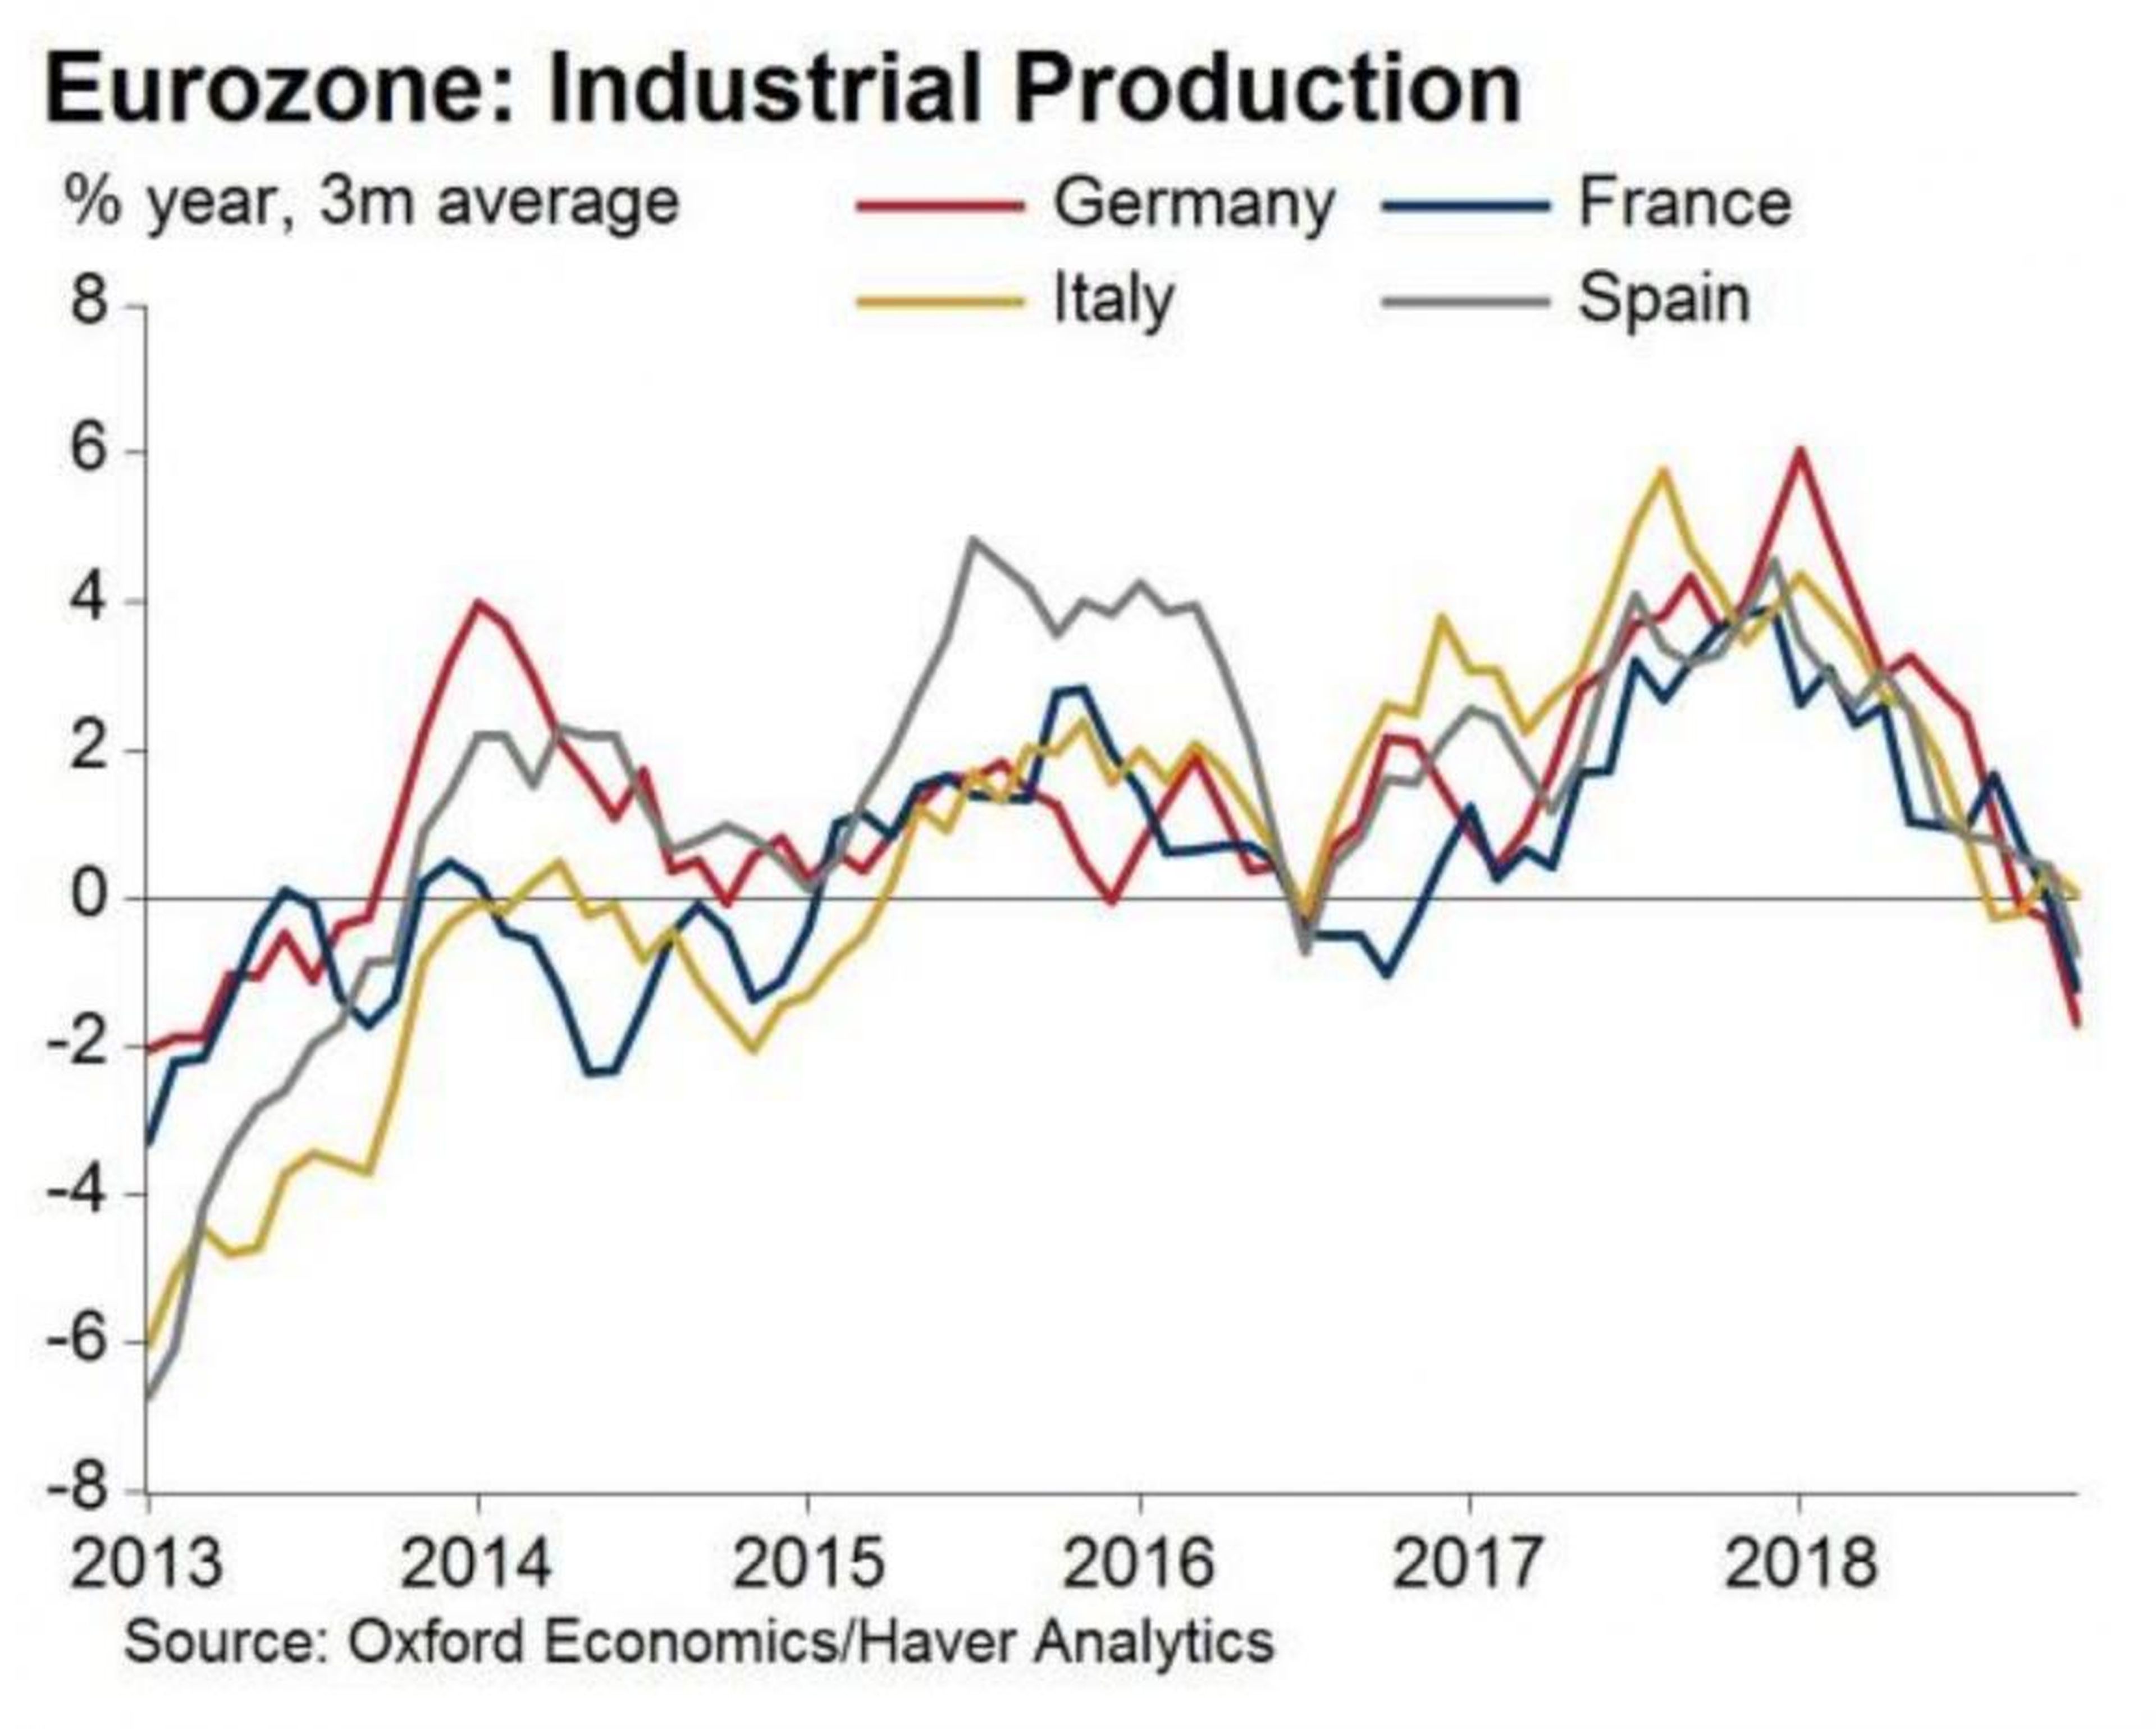 Industrial production in Germany, Italy, France and Spain all took a simultaneous dive in November.